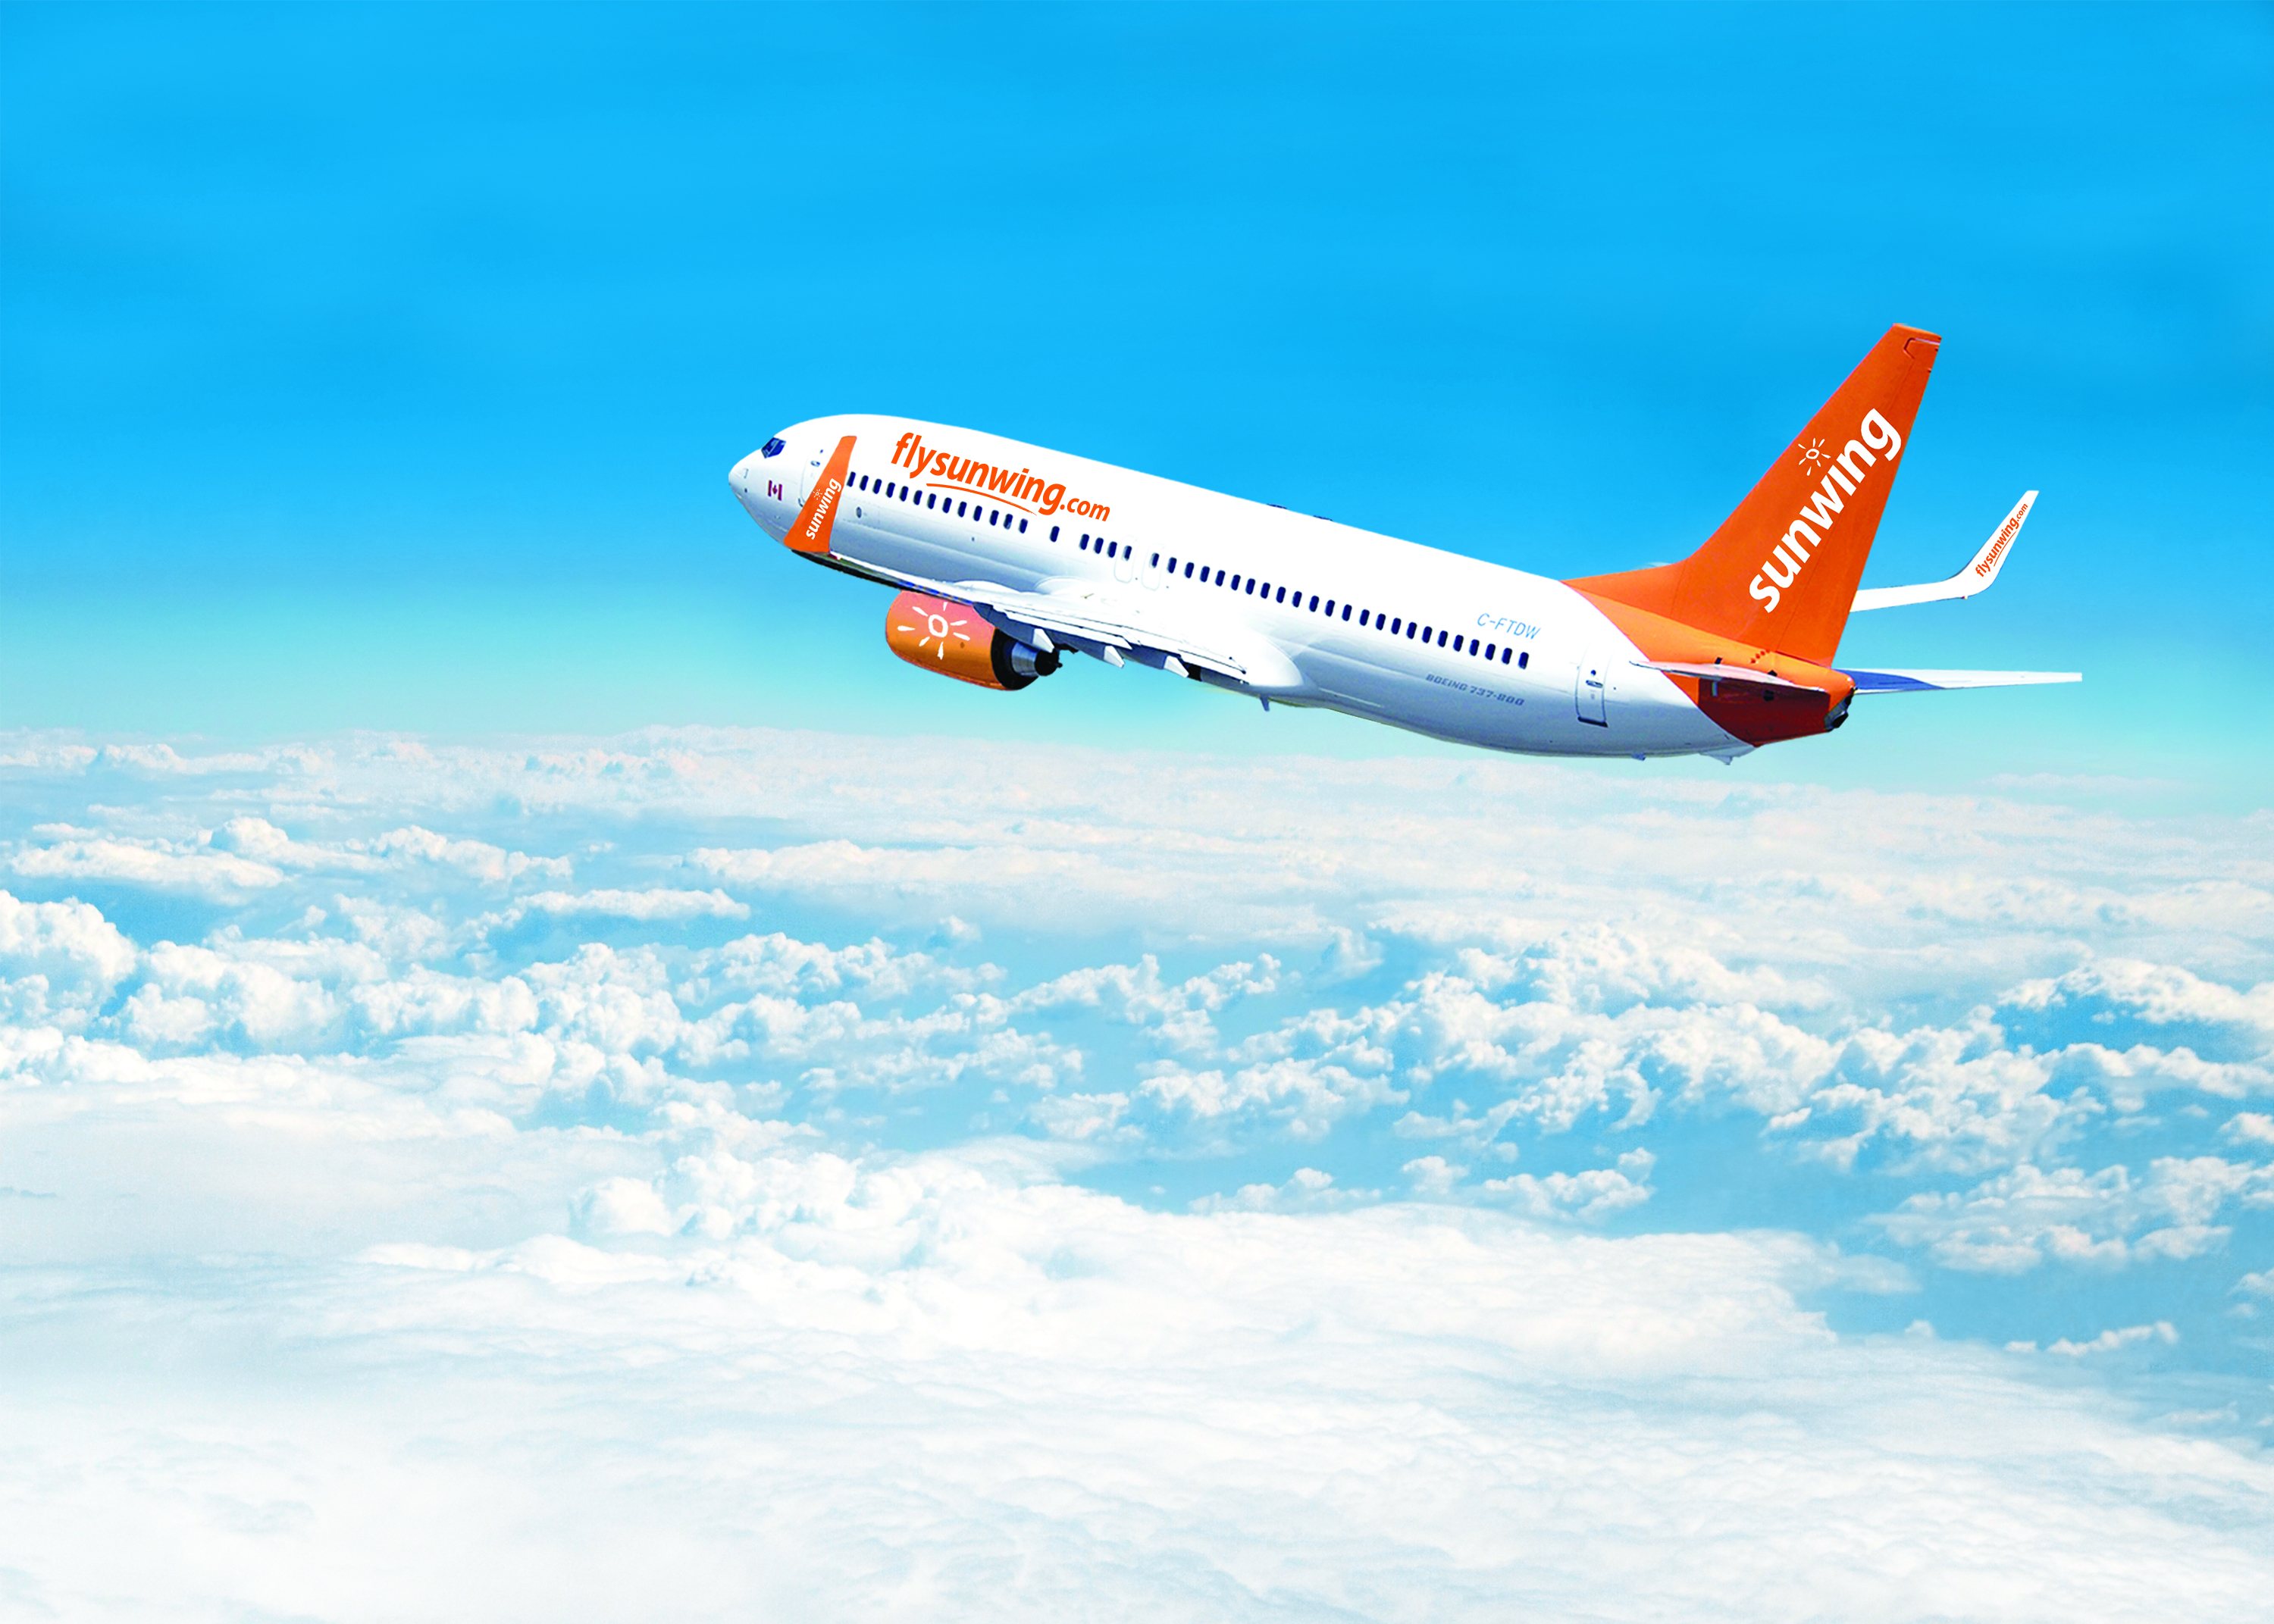 Sunwing expands flight service from Toronto and Montreal